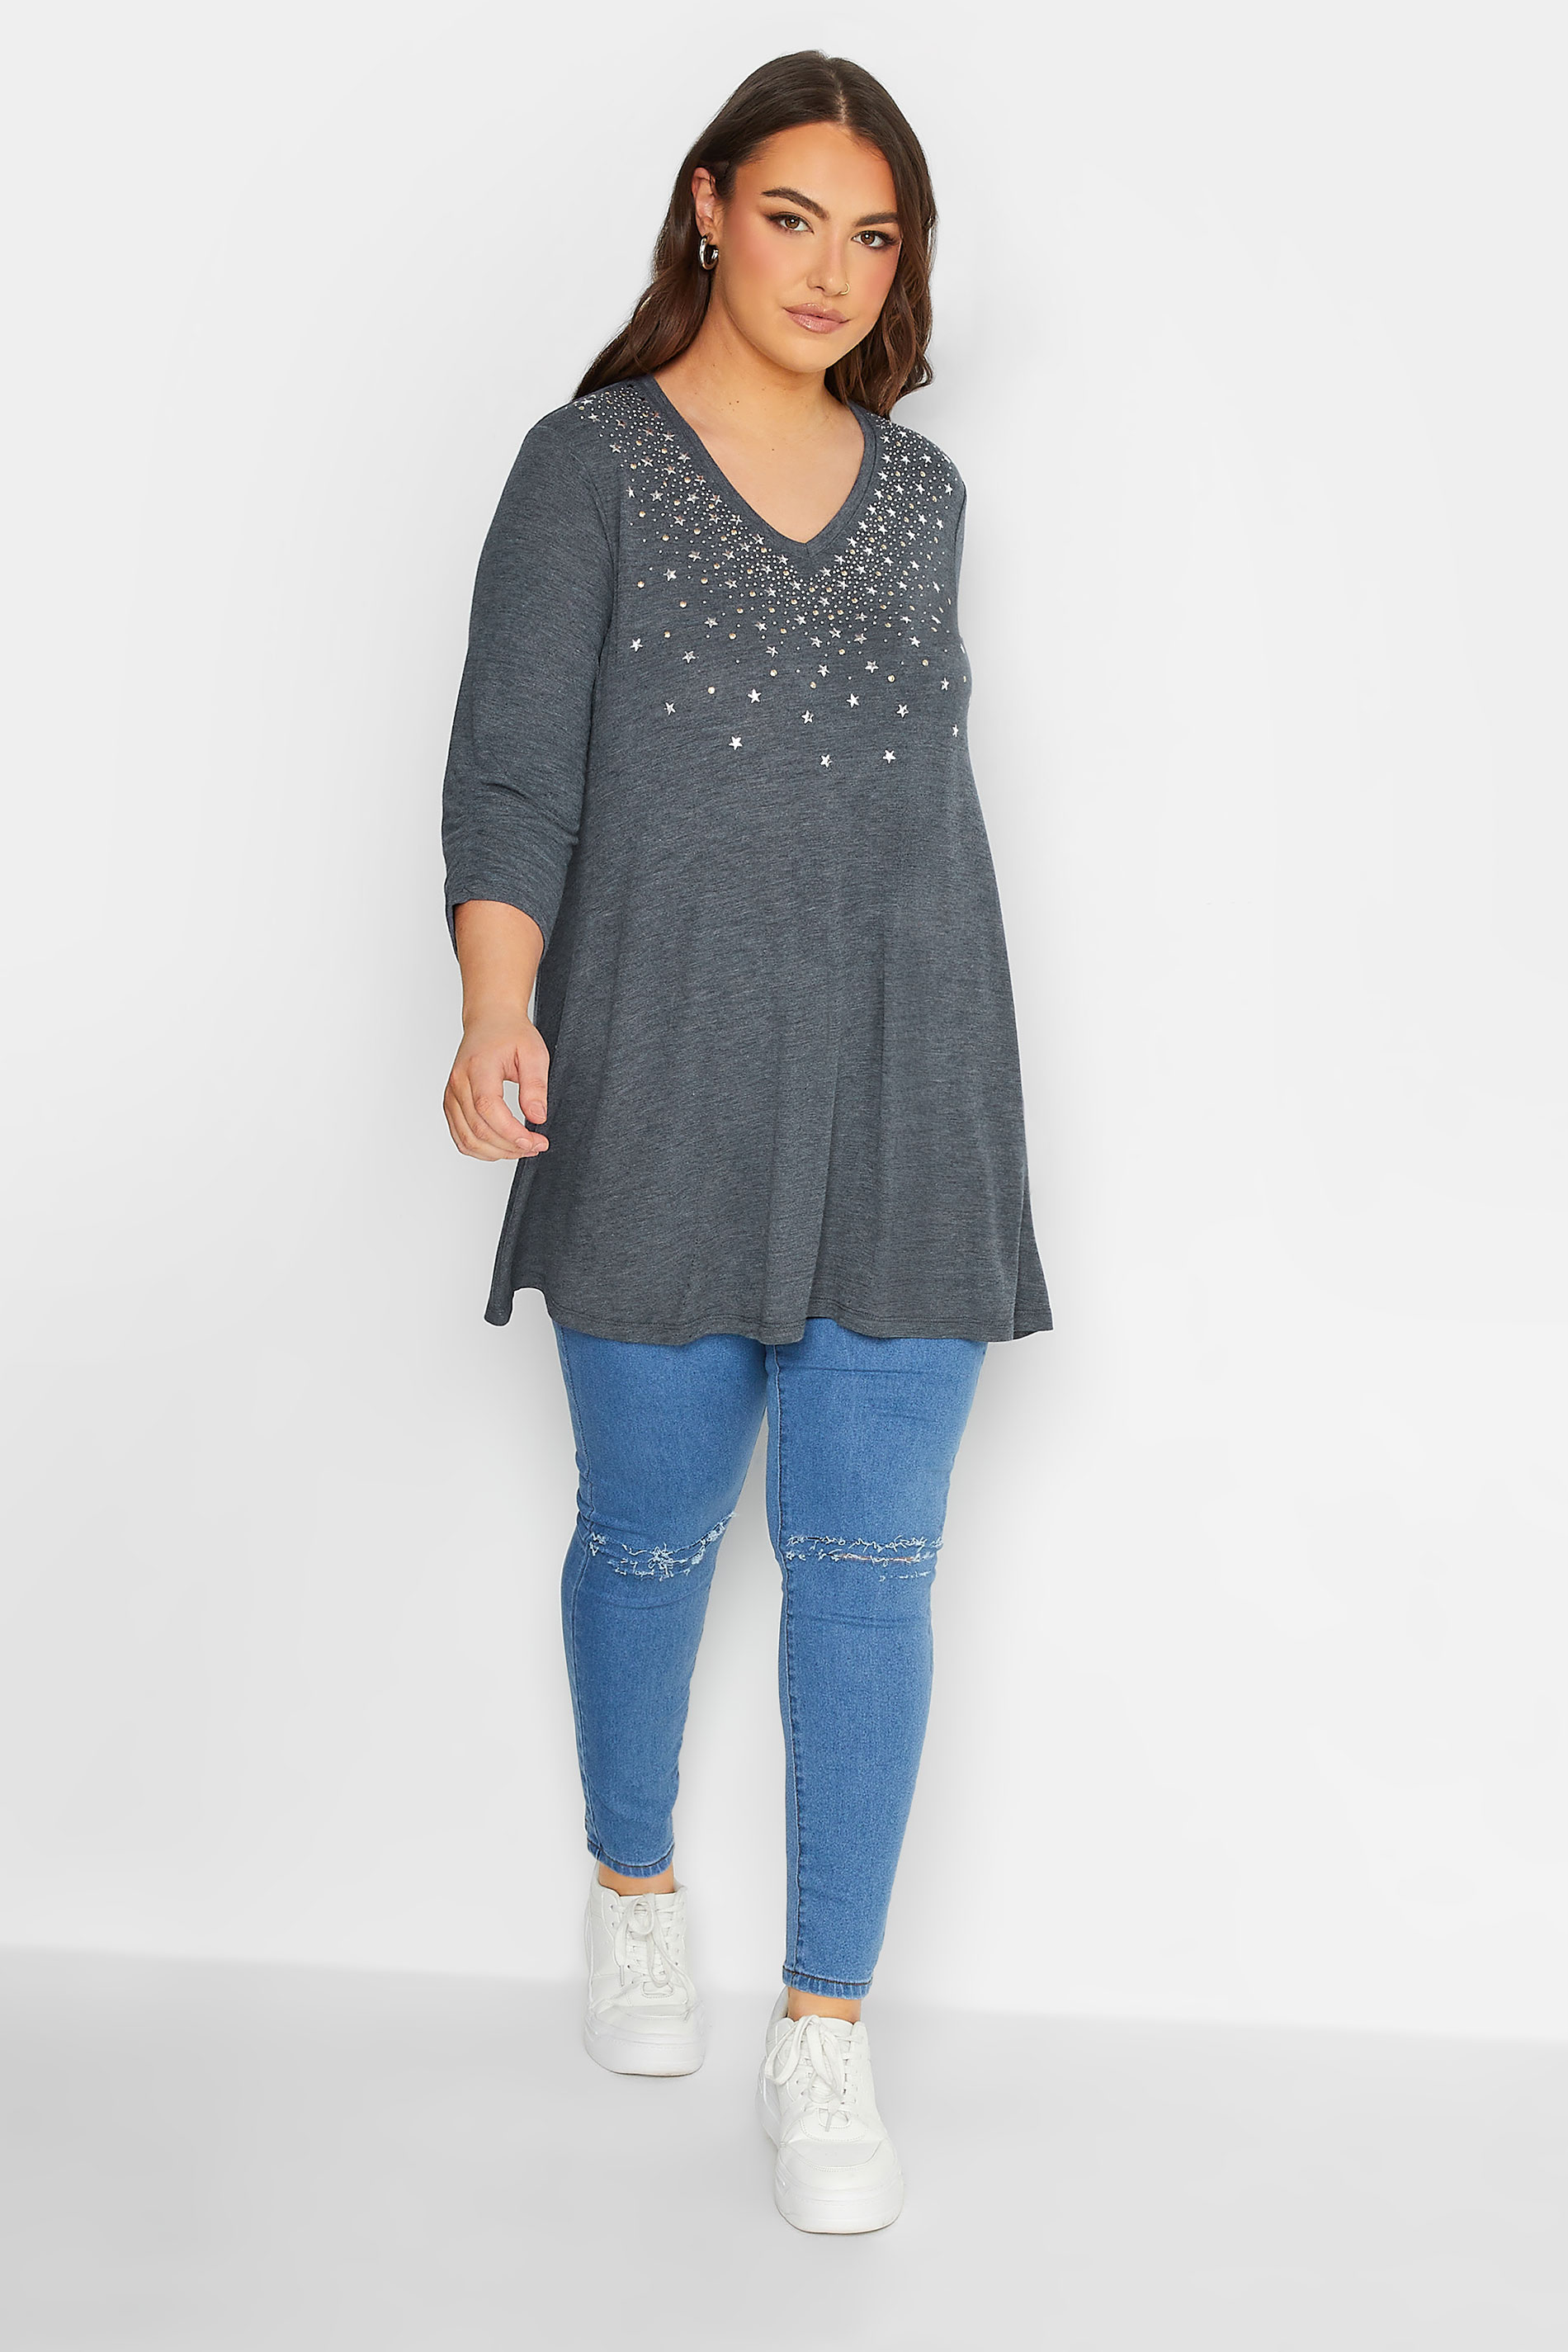 YOURS Plus Size Blue Star Embellished Jersey Top | Yours Clothing 2